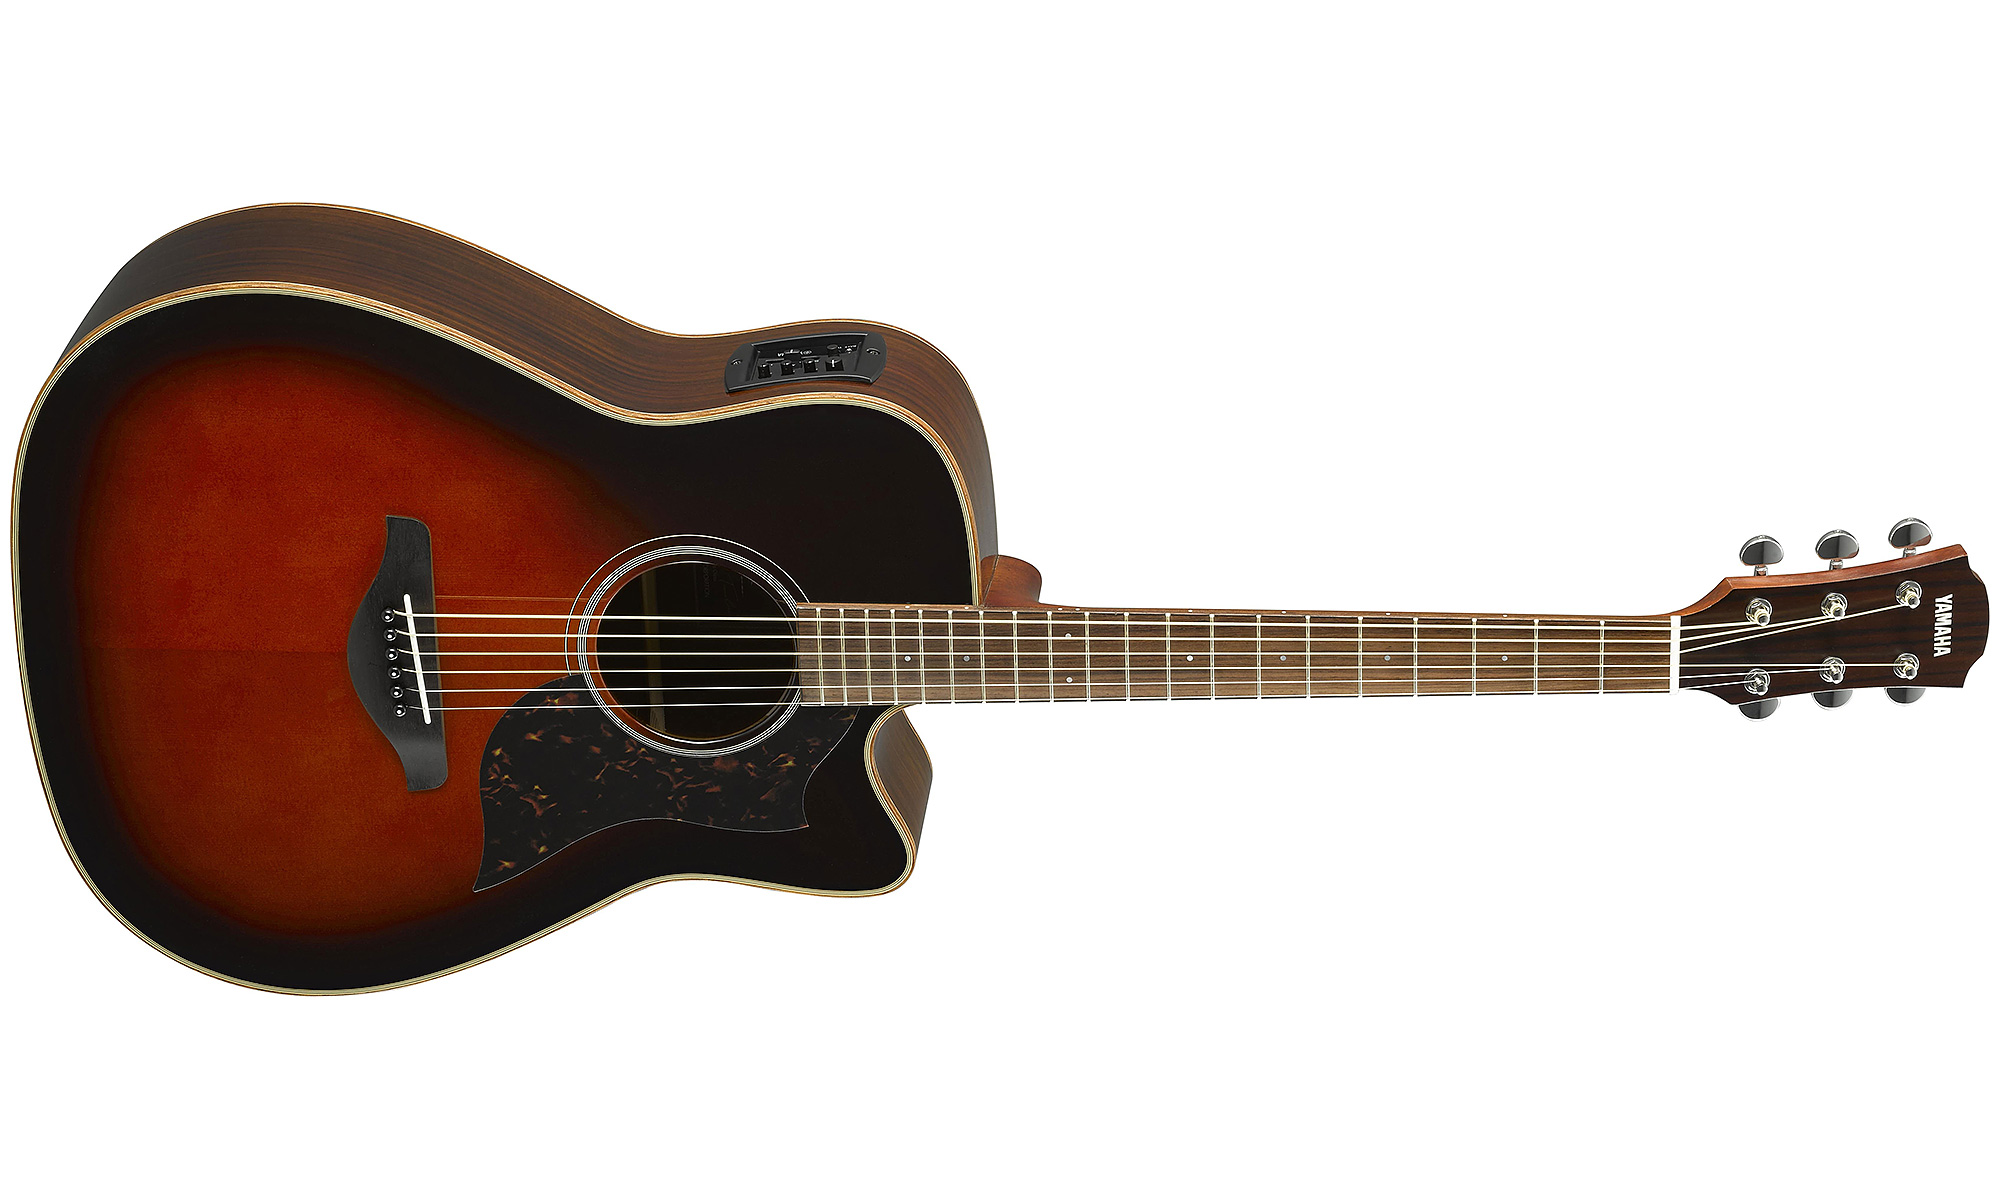 Yamaha A1r Ii Tbs Dreadnought Cw Epicea Palissandre 2017 - Tobacco Brown Sunburst - Electro acoustic guitar - Variation 1